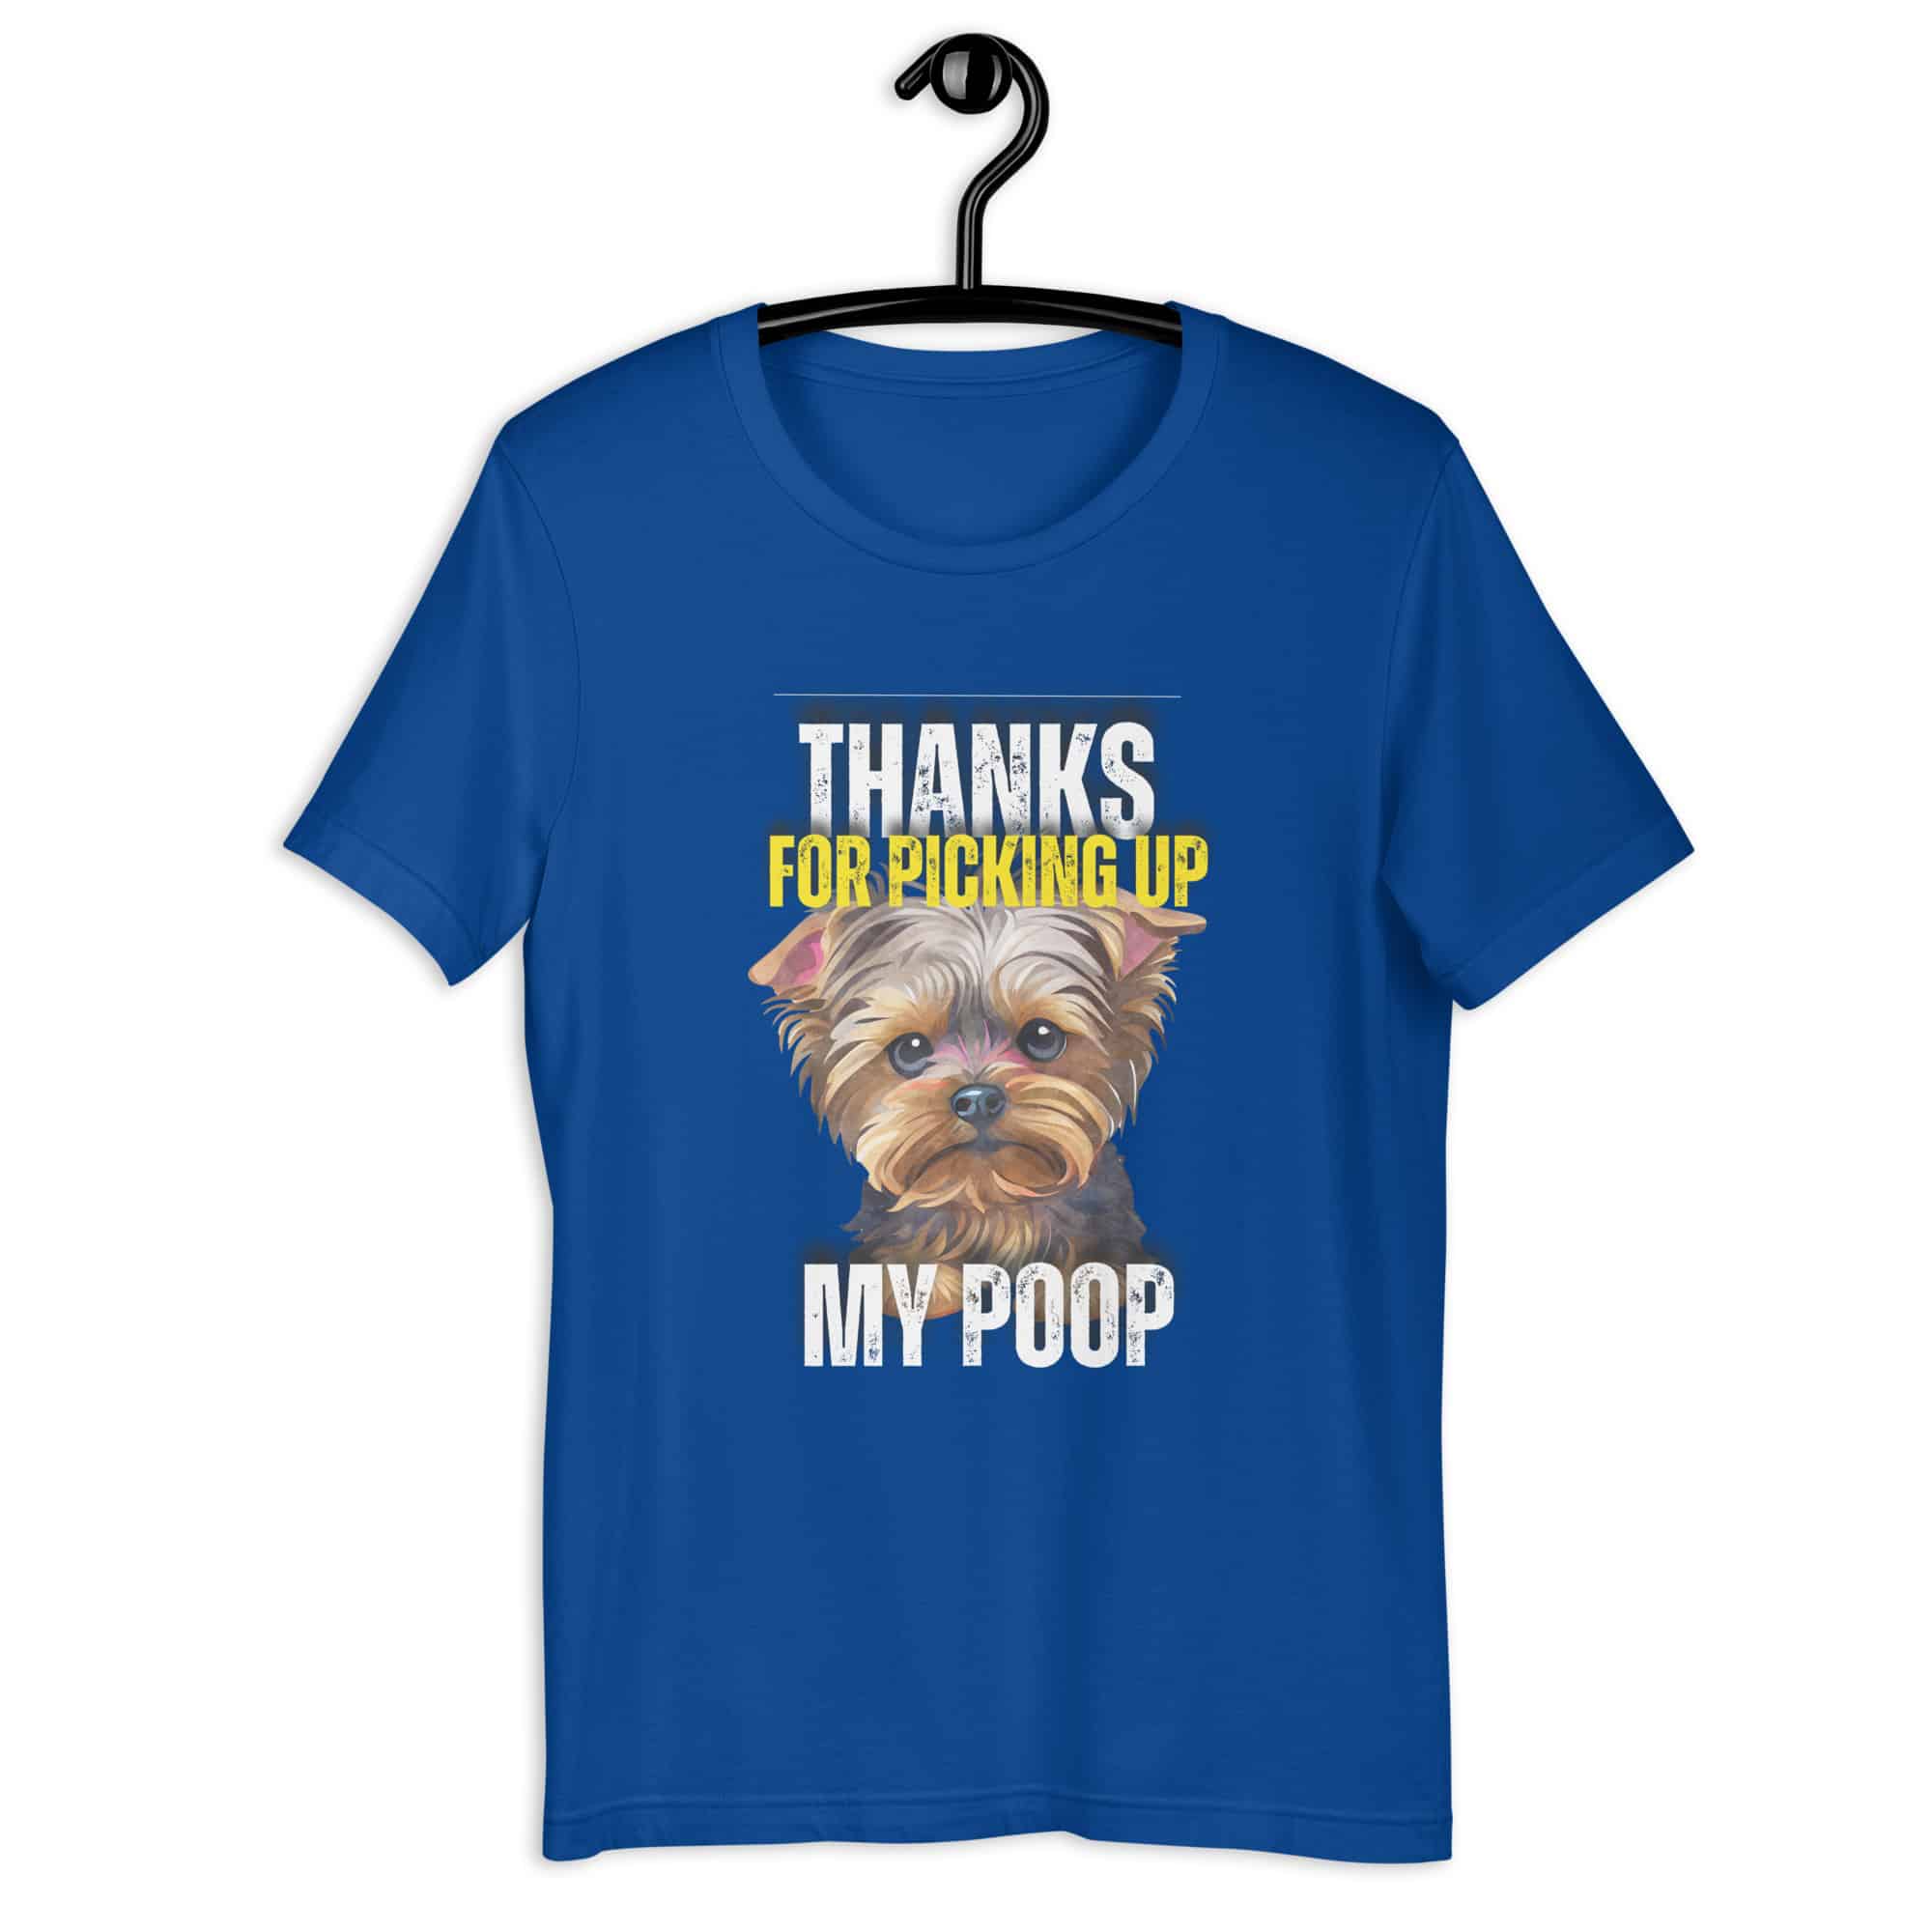 Thanks For Picking Up My POOP Funny Poodles Unisex T-Shirt. Royal blue